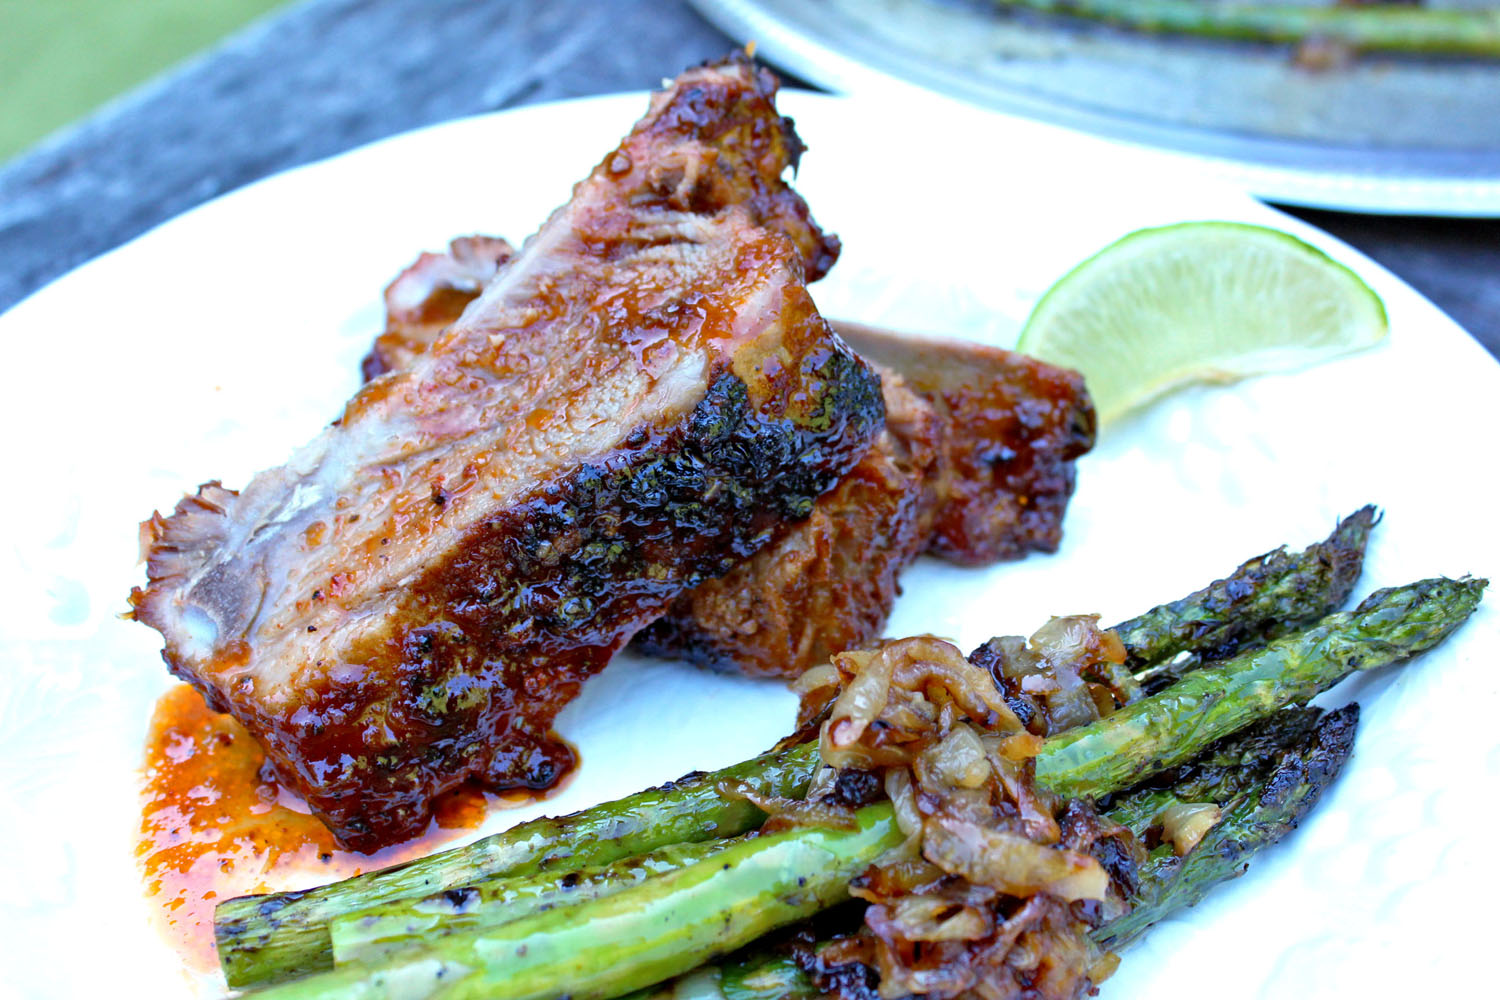 Tequila Glazed Ribs with Grilled Asparagus & Caramelized Onions